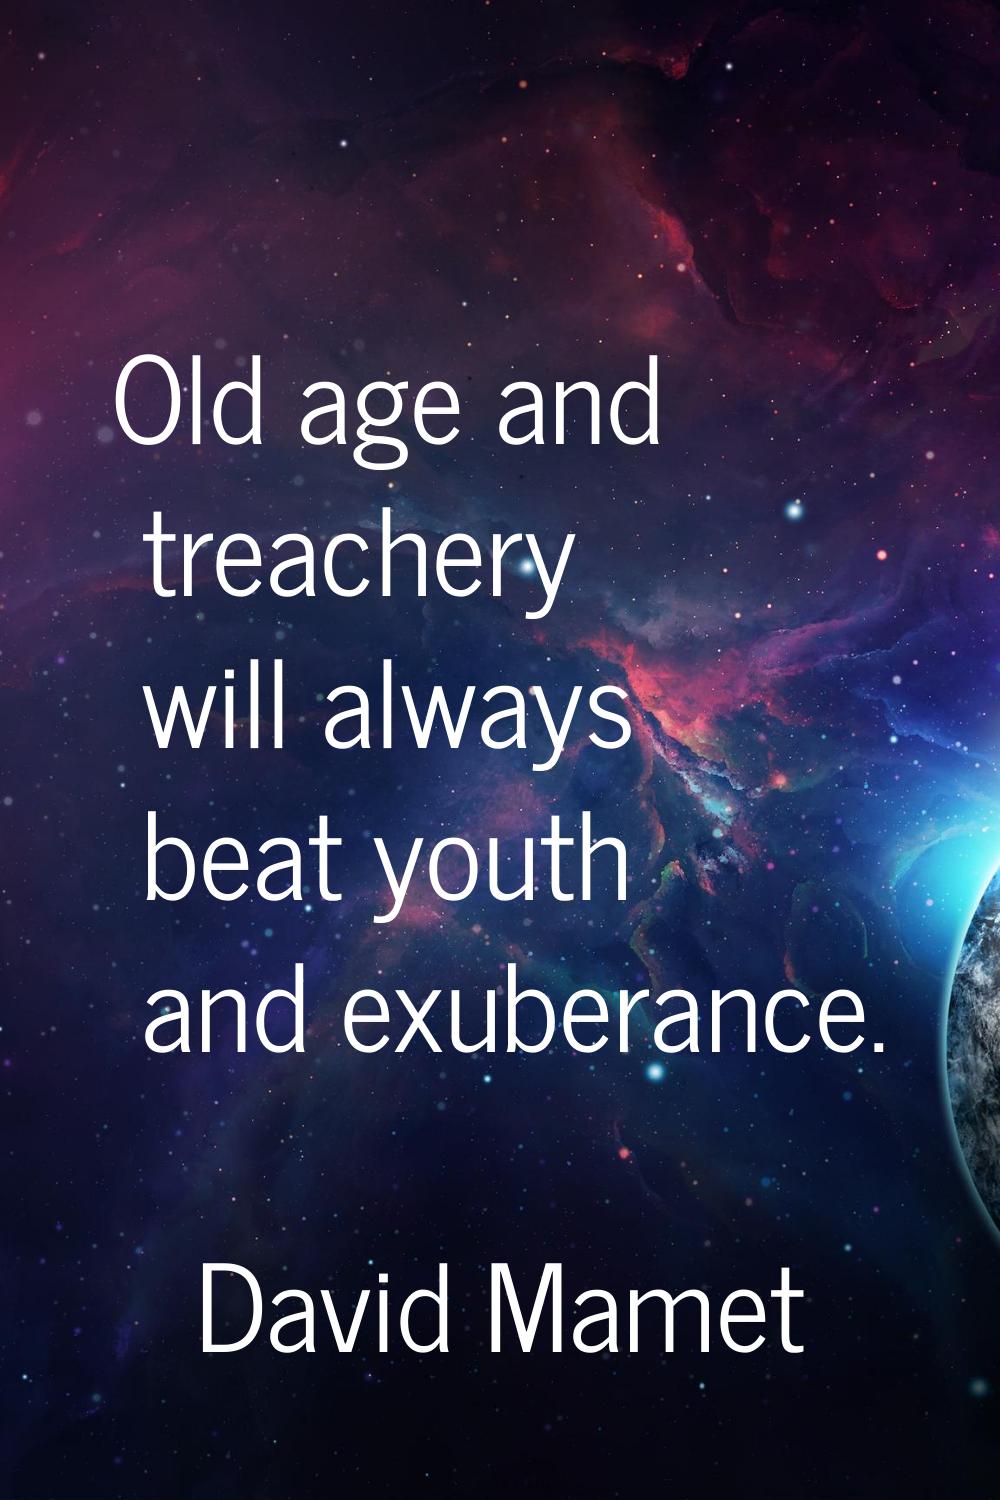 Old age and treachery will always beat youth and exuberance.